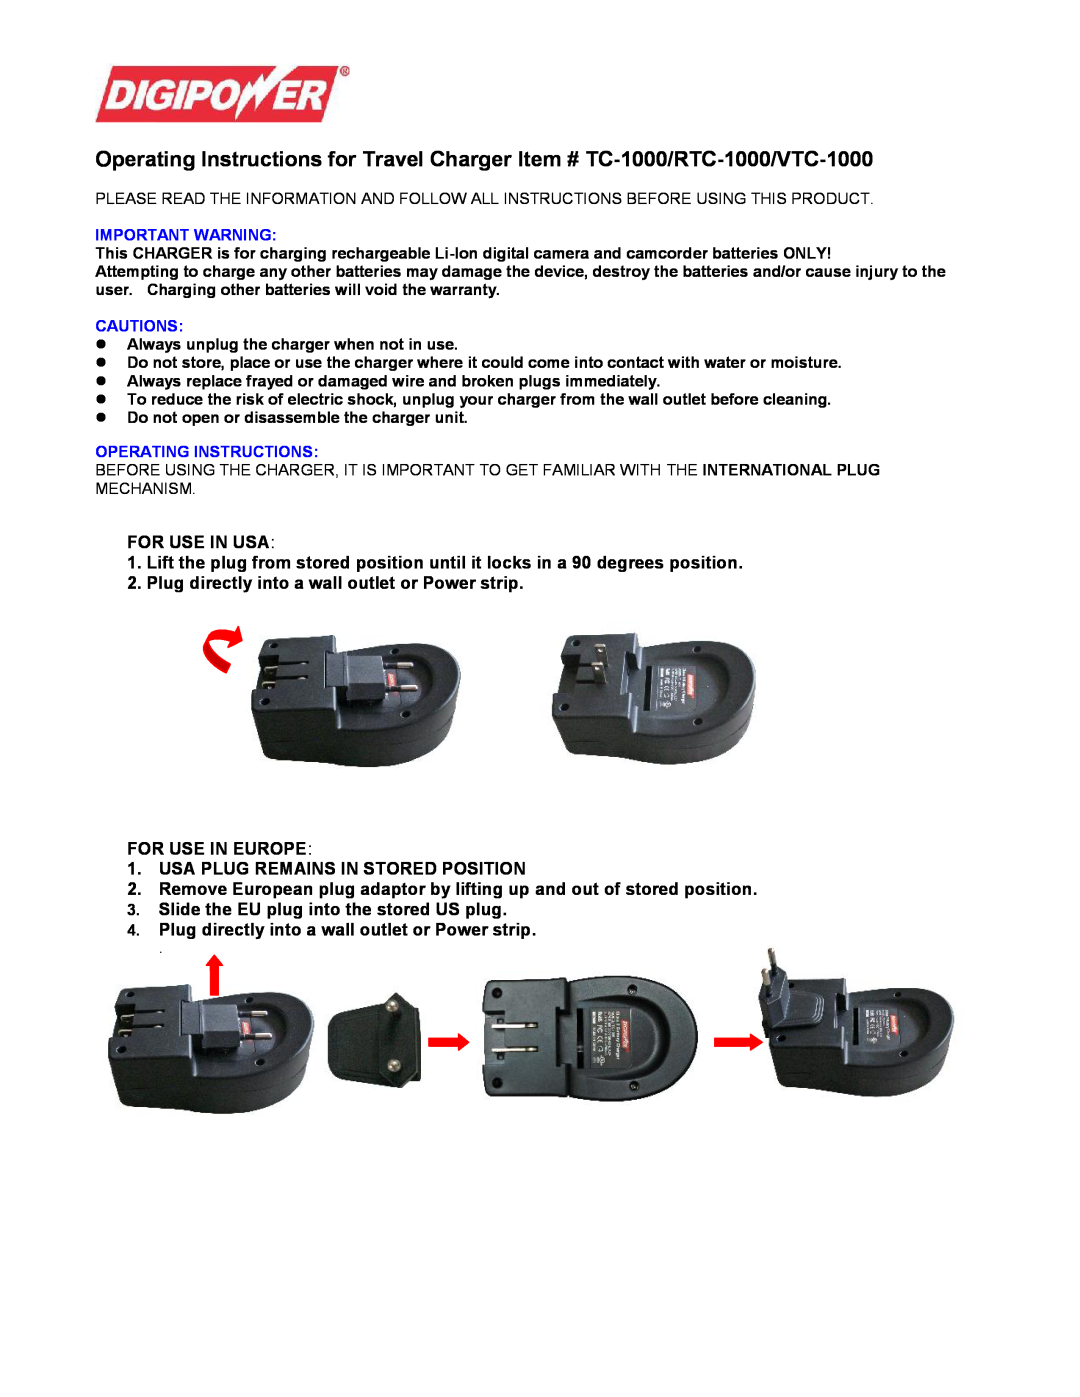 DigiPower VTC-1000 operating instructions For Use In Usa, Usa Plug Remains In Stored Position, Important Warning, Cautions 